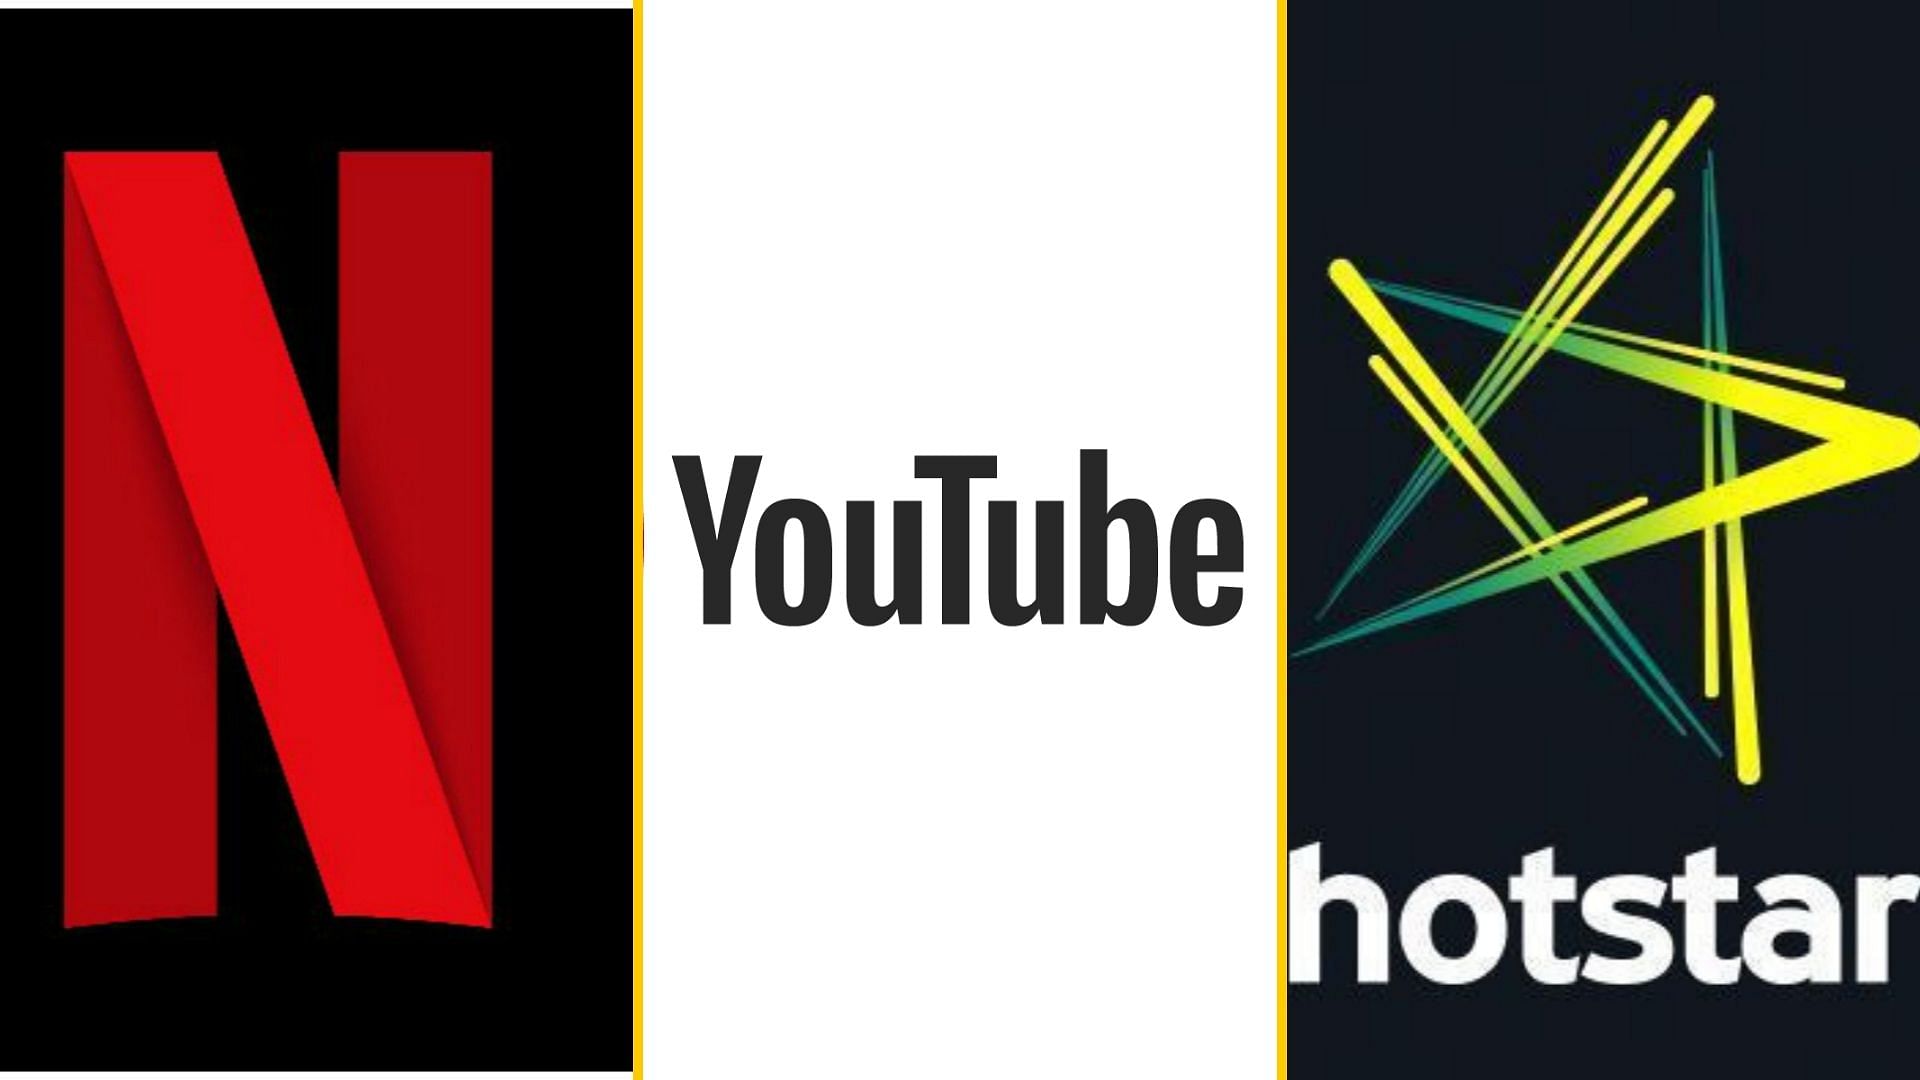 The report refers to Hotstar, Netflix, Amazon Prime Video and YouTube as ‘the big 4’.